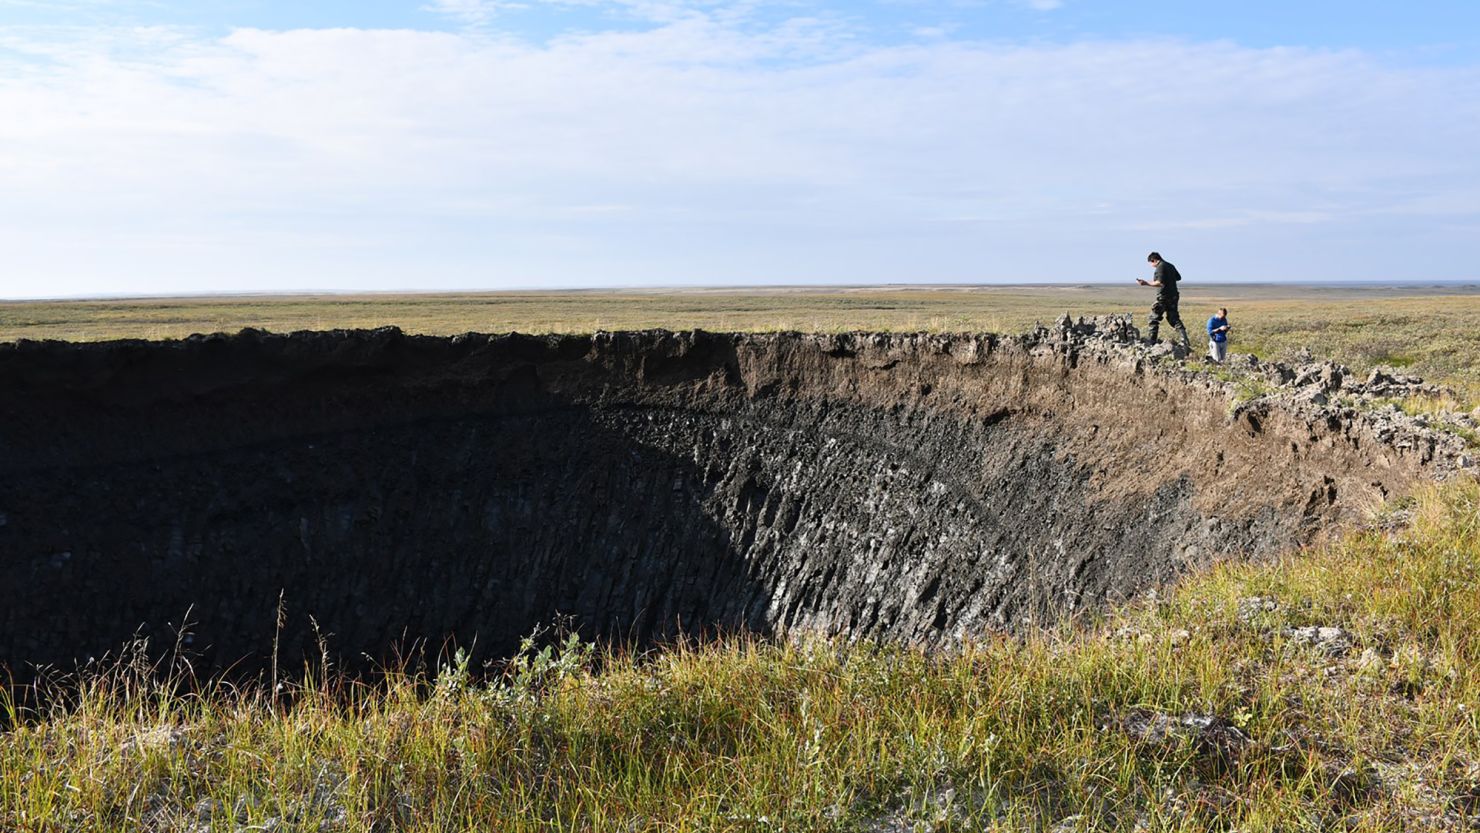 In August 2020, the RAS Institute of Oil and Gas Problems, supported by the local Yamal authorities, conducted a major expedition to the new crater. Skoltech researchers were part of the final stages of that expedition.
Credit: Evgeny Chuvilin